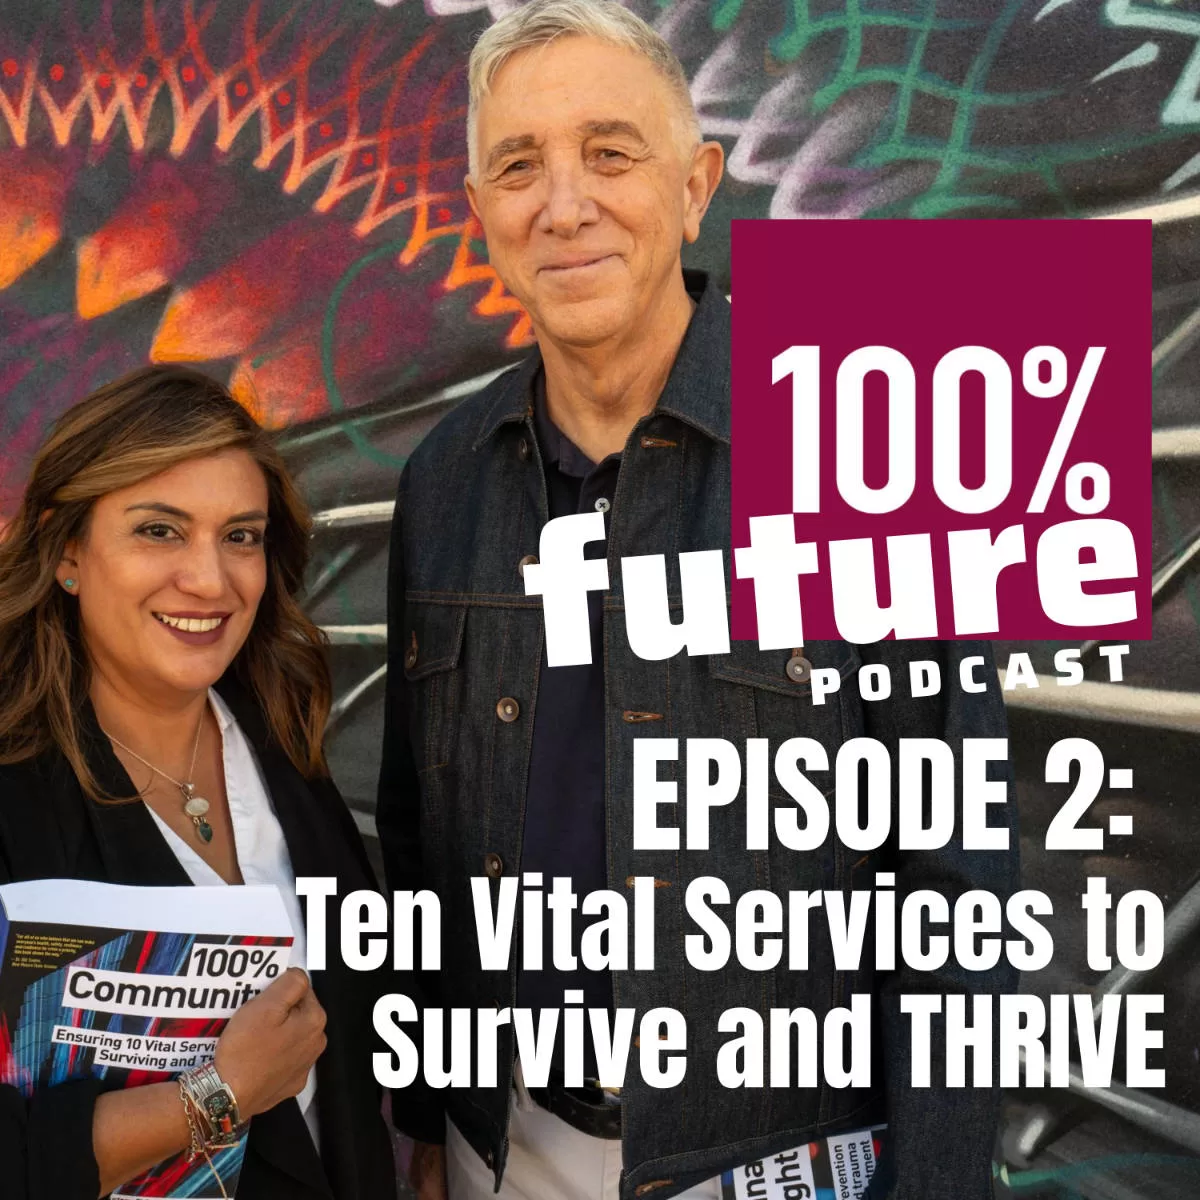 Episode 2: Ten Vital Services to Survive and Thrive